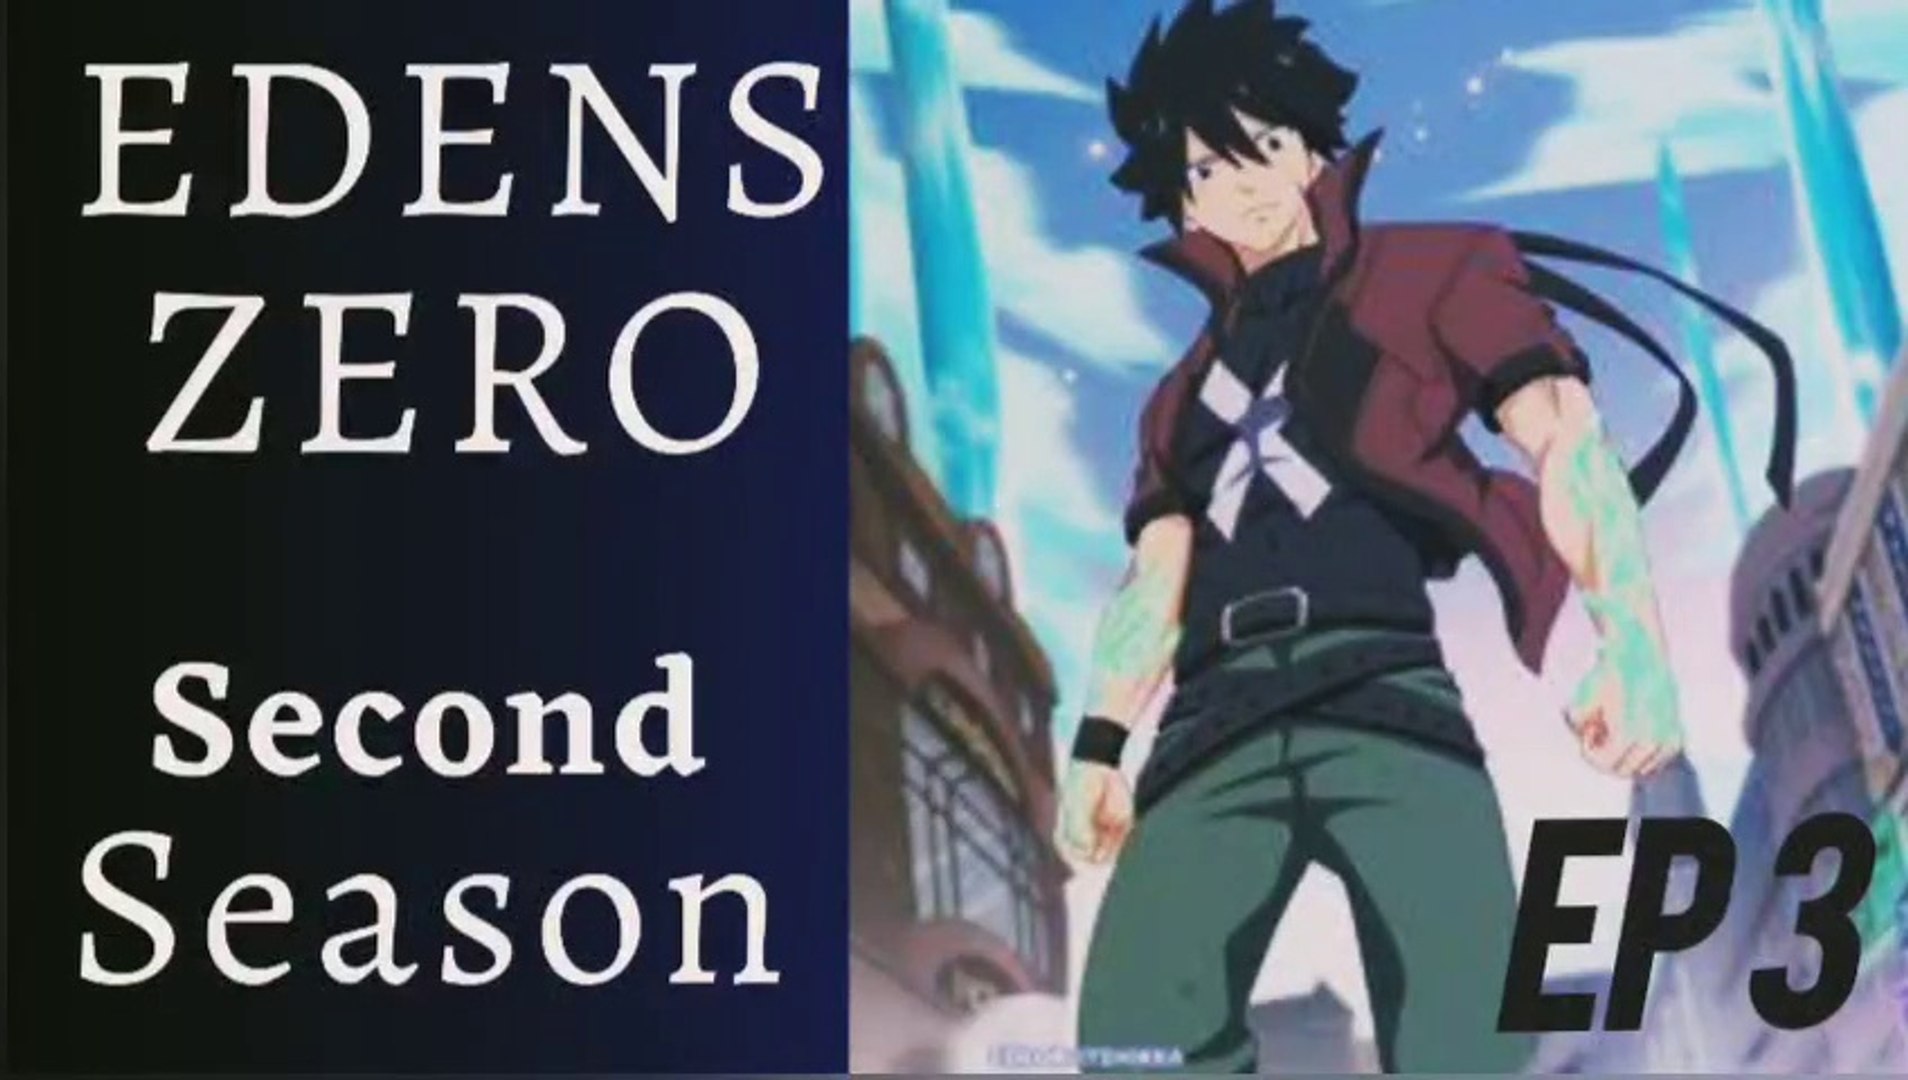 Characters appearing in Edens Zero 2nd Season Anime